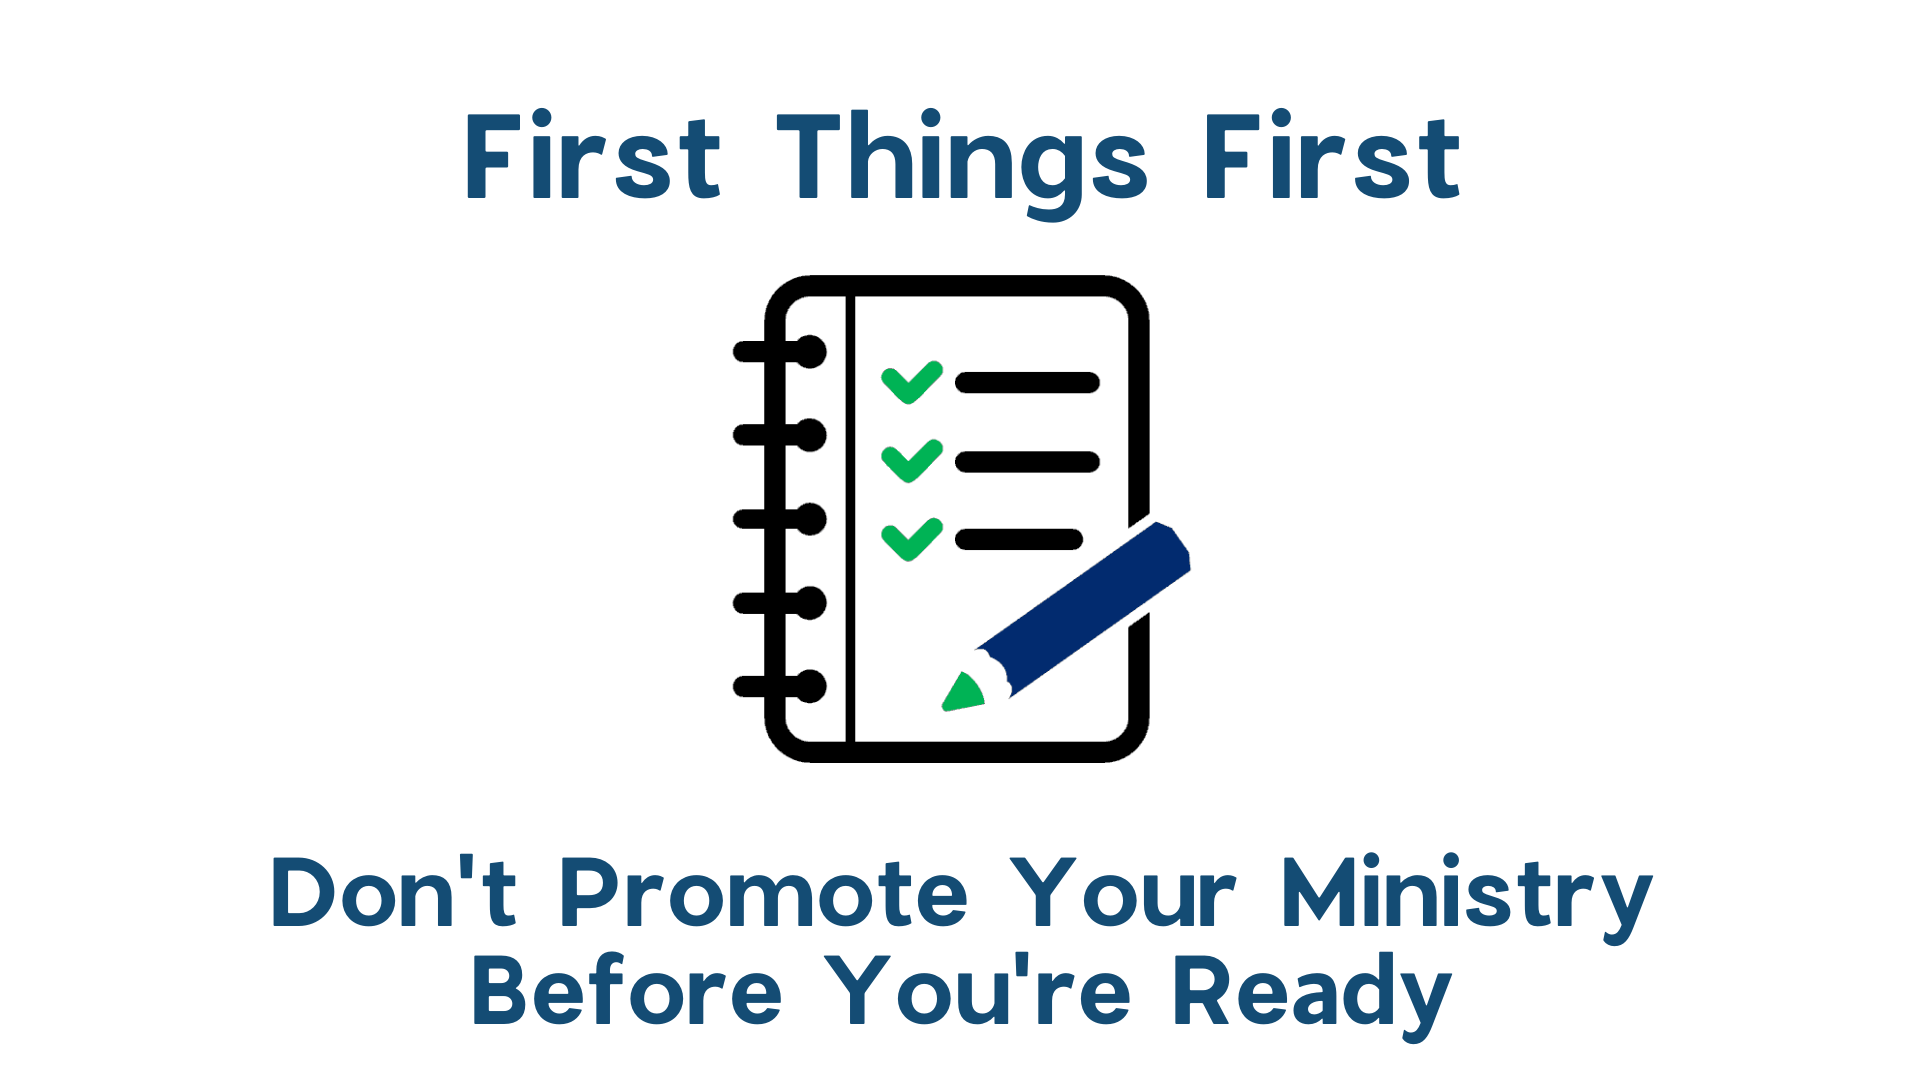 First Things First (don't promote your ministry before you're ready)